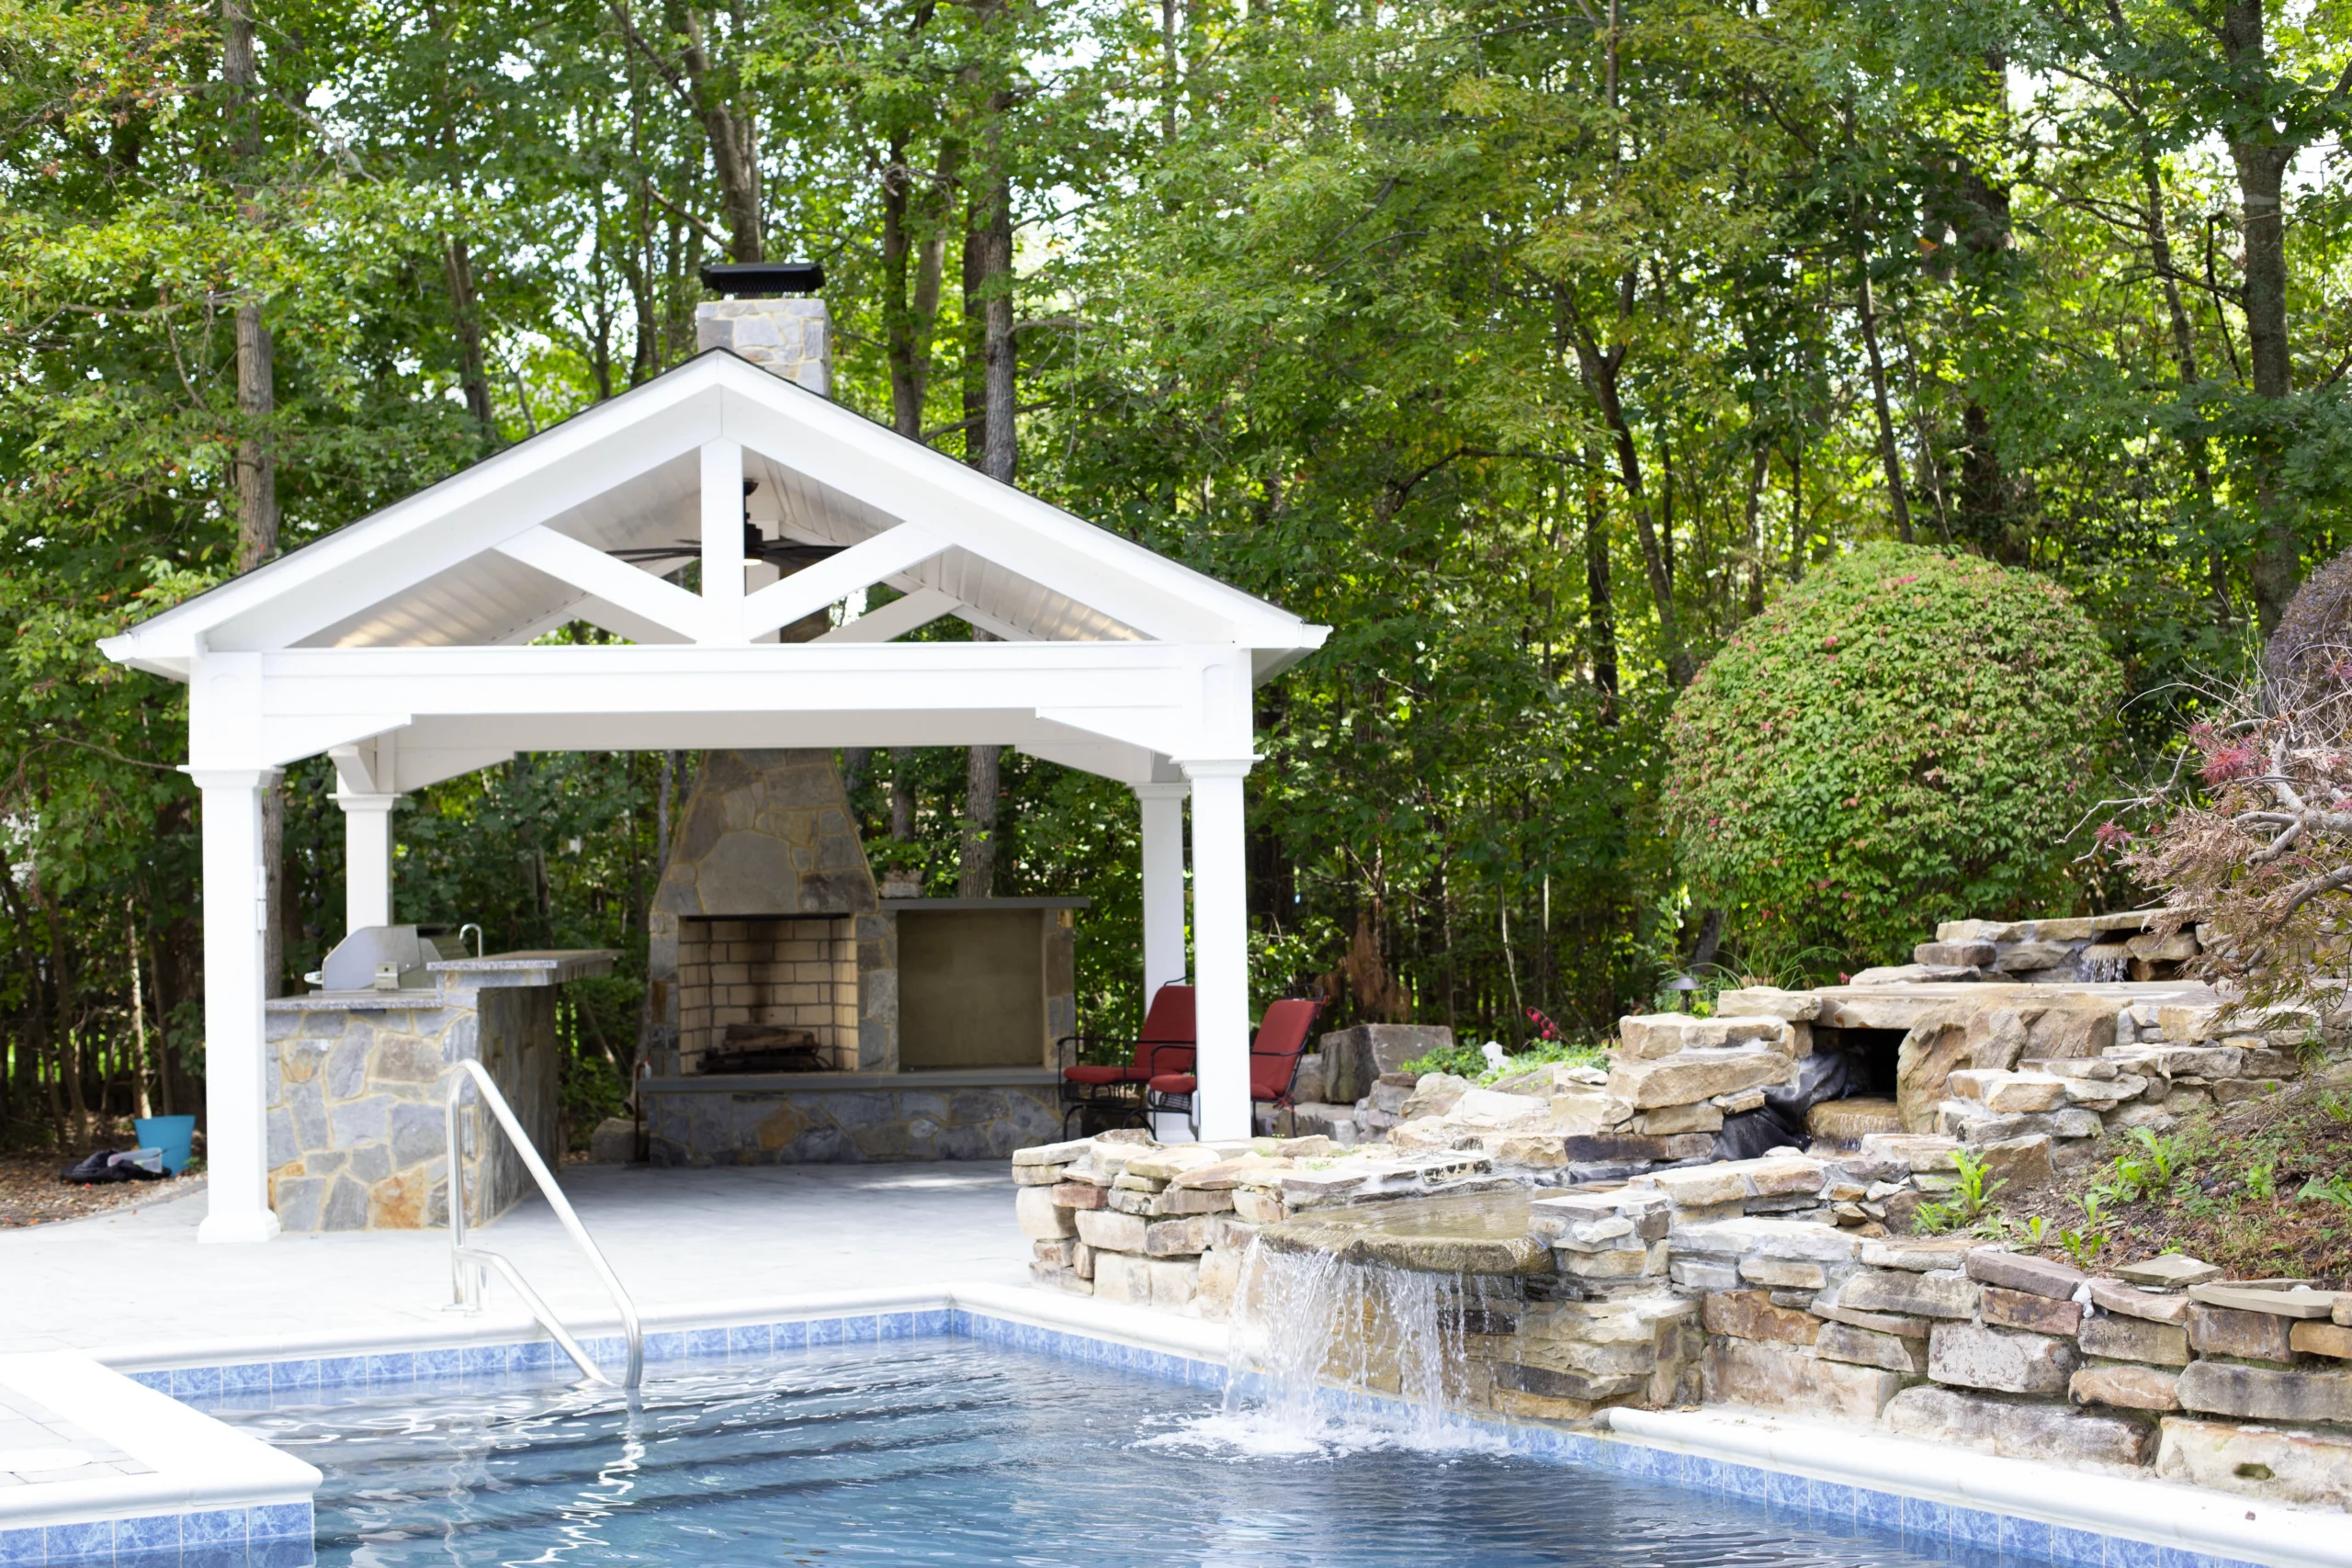 White pavilion over outdoor custom stone mosaic outdoor kitchen with pool in the front.